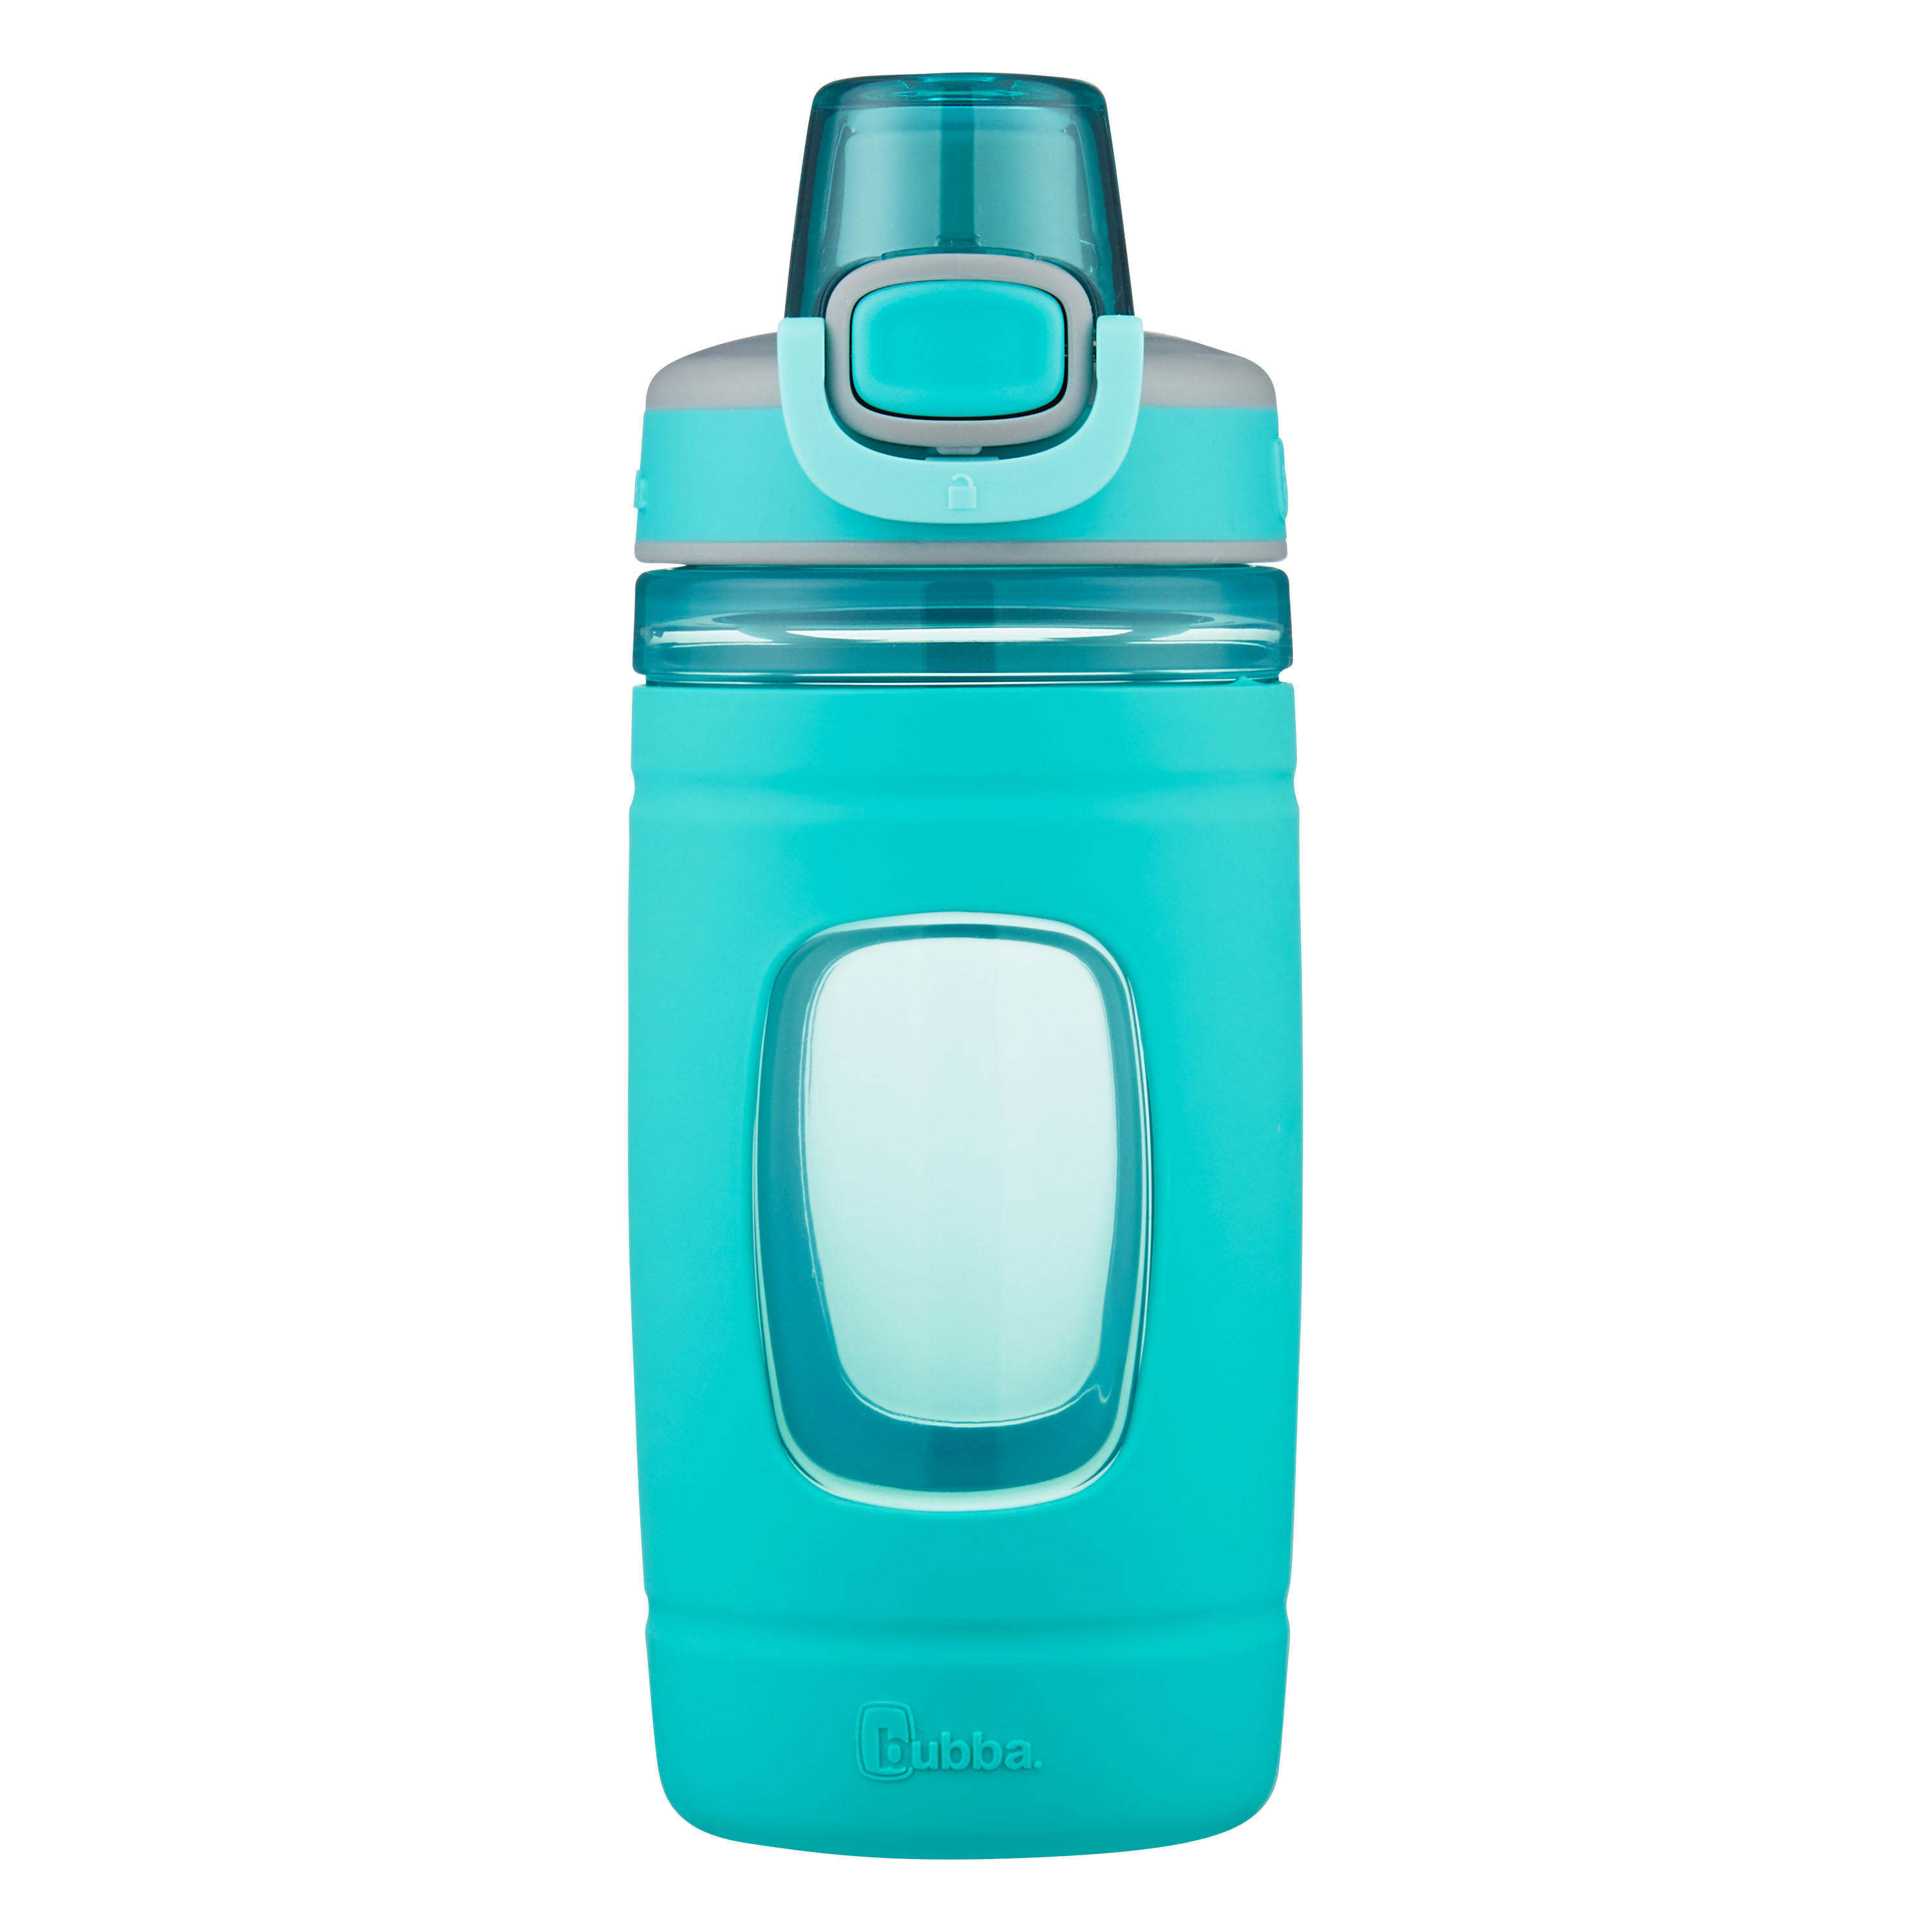 Bubba Flo Kids 16 oz Aqua and Gray Plastic Water Bottle with Wide Mouth Lid - image 5 of 6